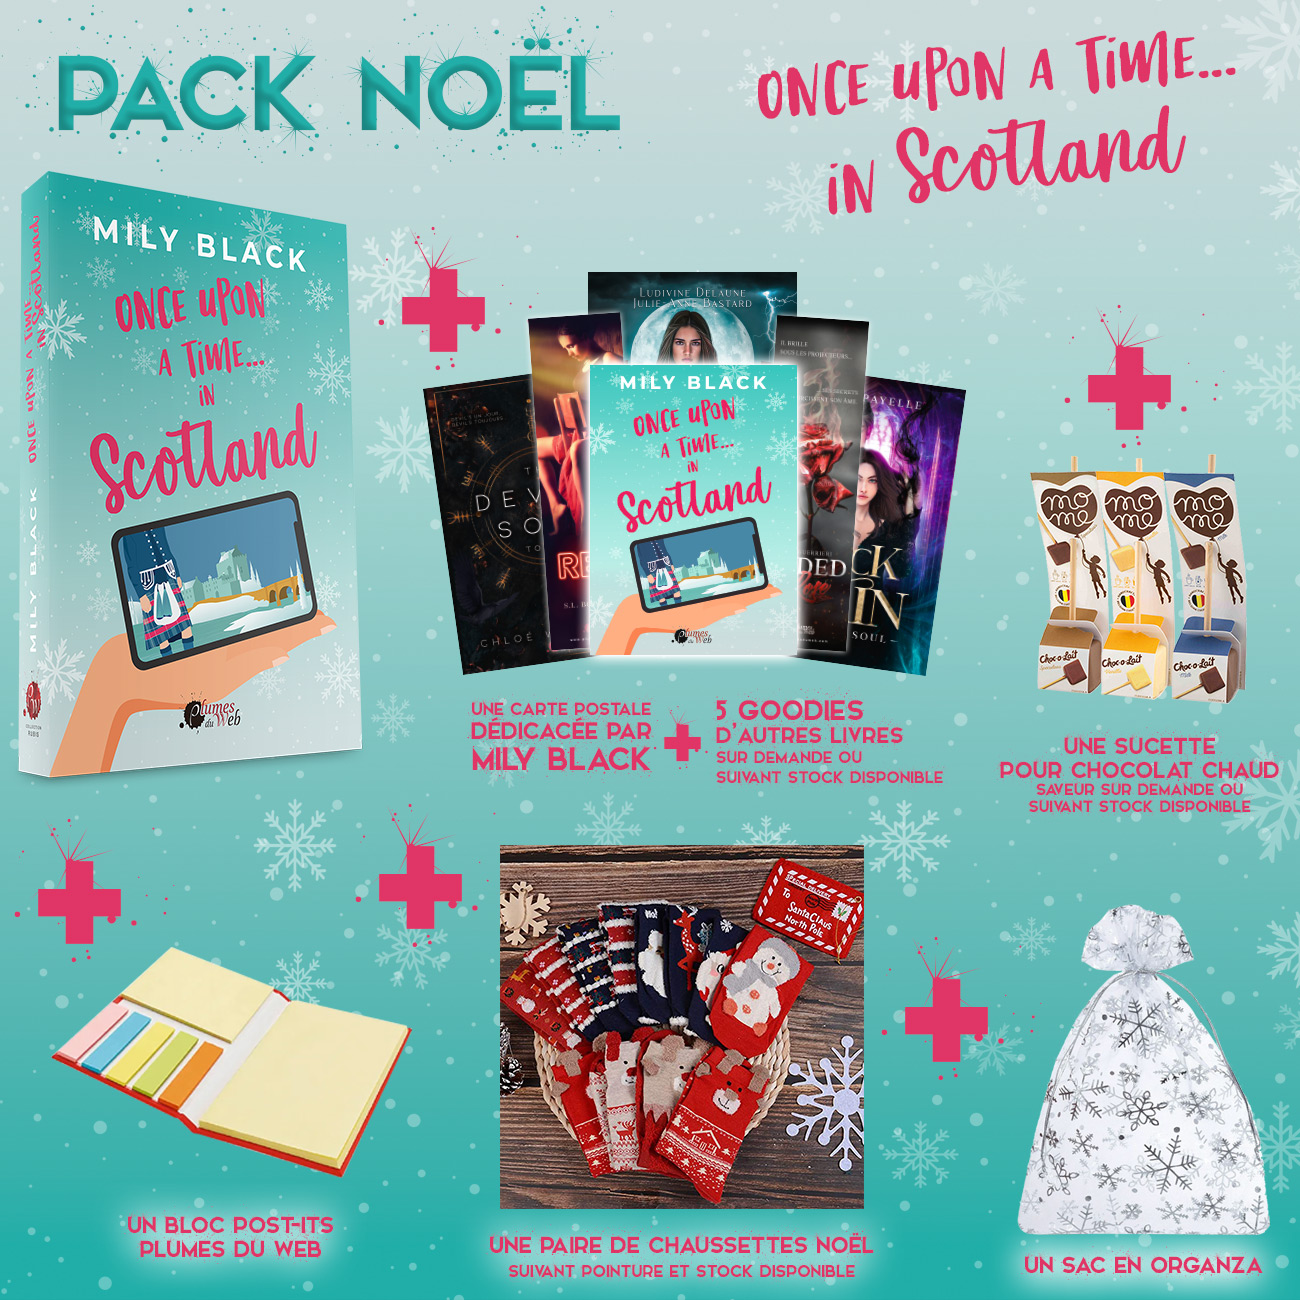 Pack Noël "Once upon a time... in Scotland" - Mily Black - Broché 1